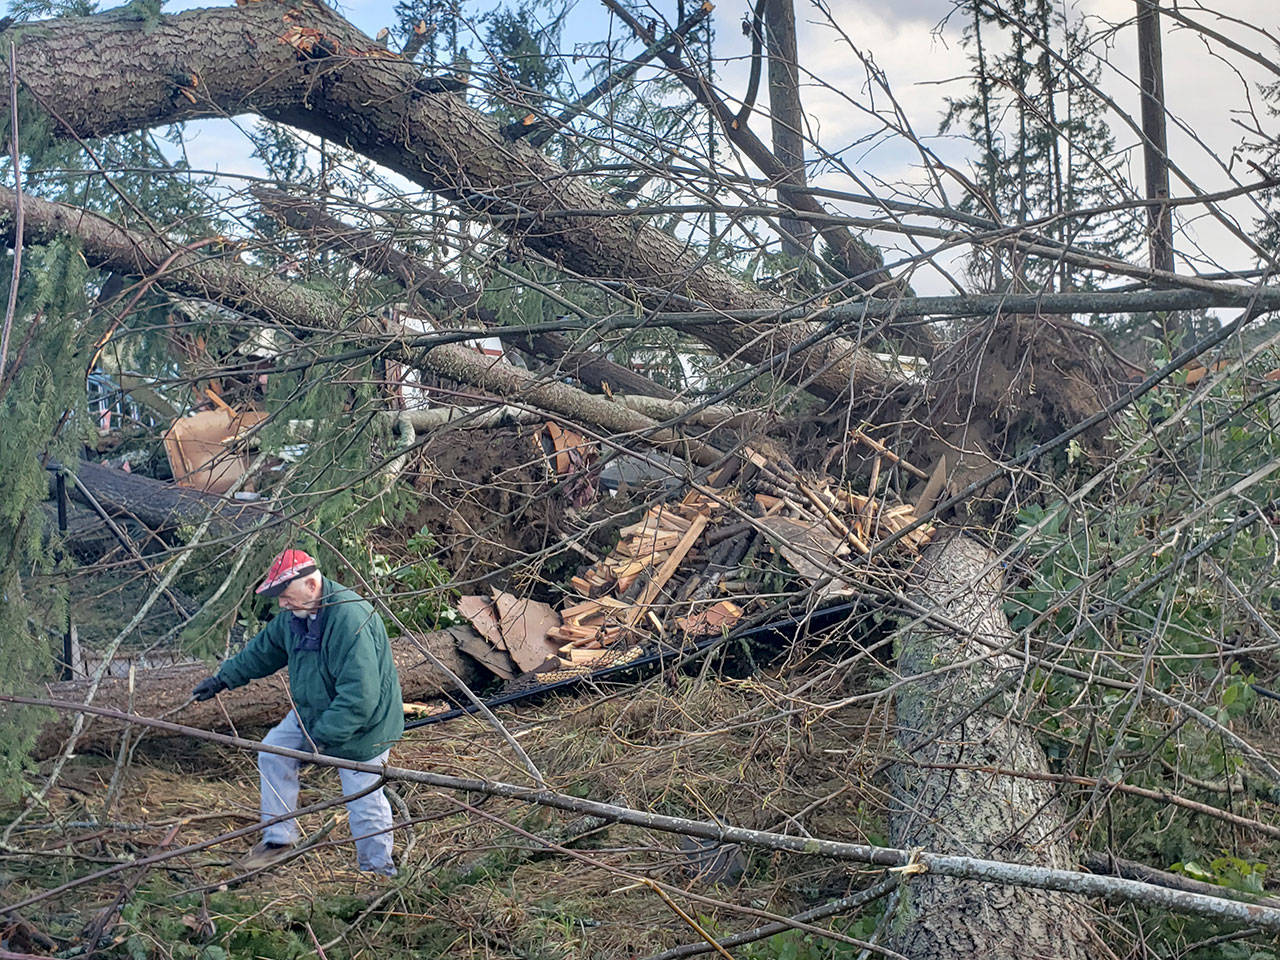 Skip Olmsted, who lives on Southeast Serenade Way, navigates his way around downed branches on his property after a tornado struck a portion of Port Orchard. (Robert Zollna/Kitsap News Group)